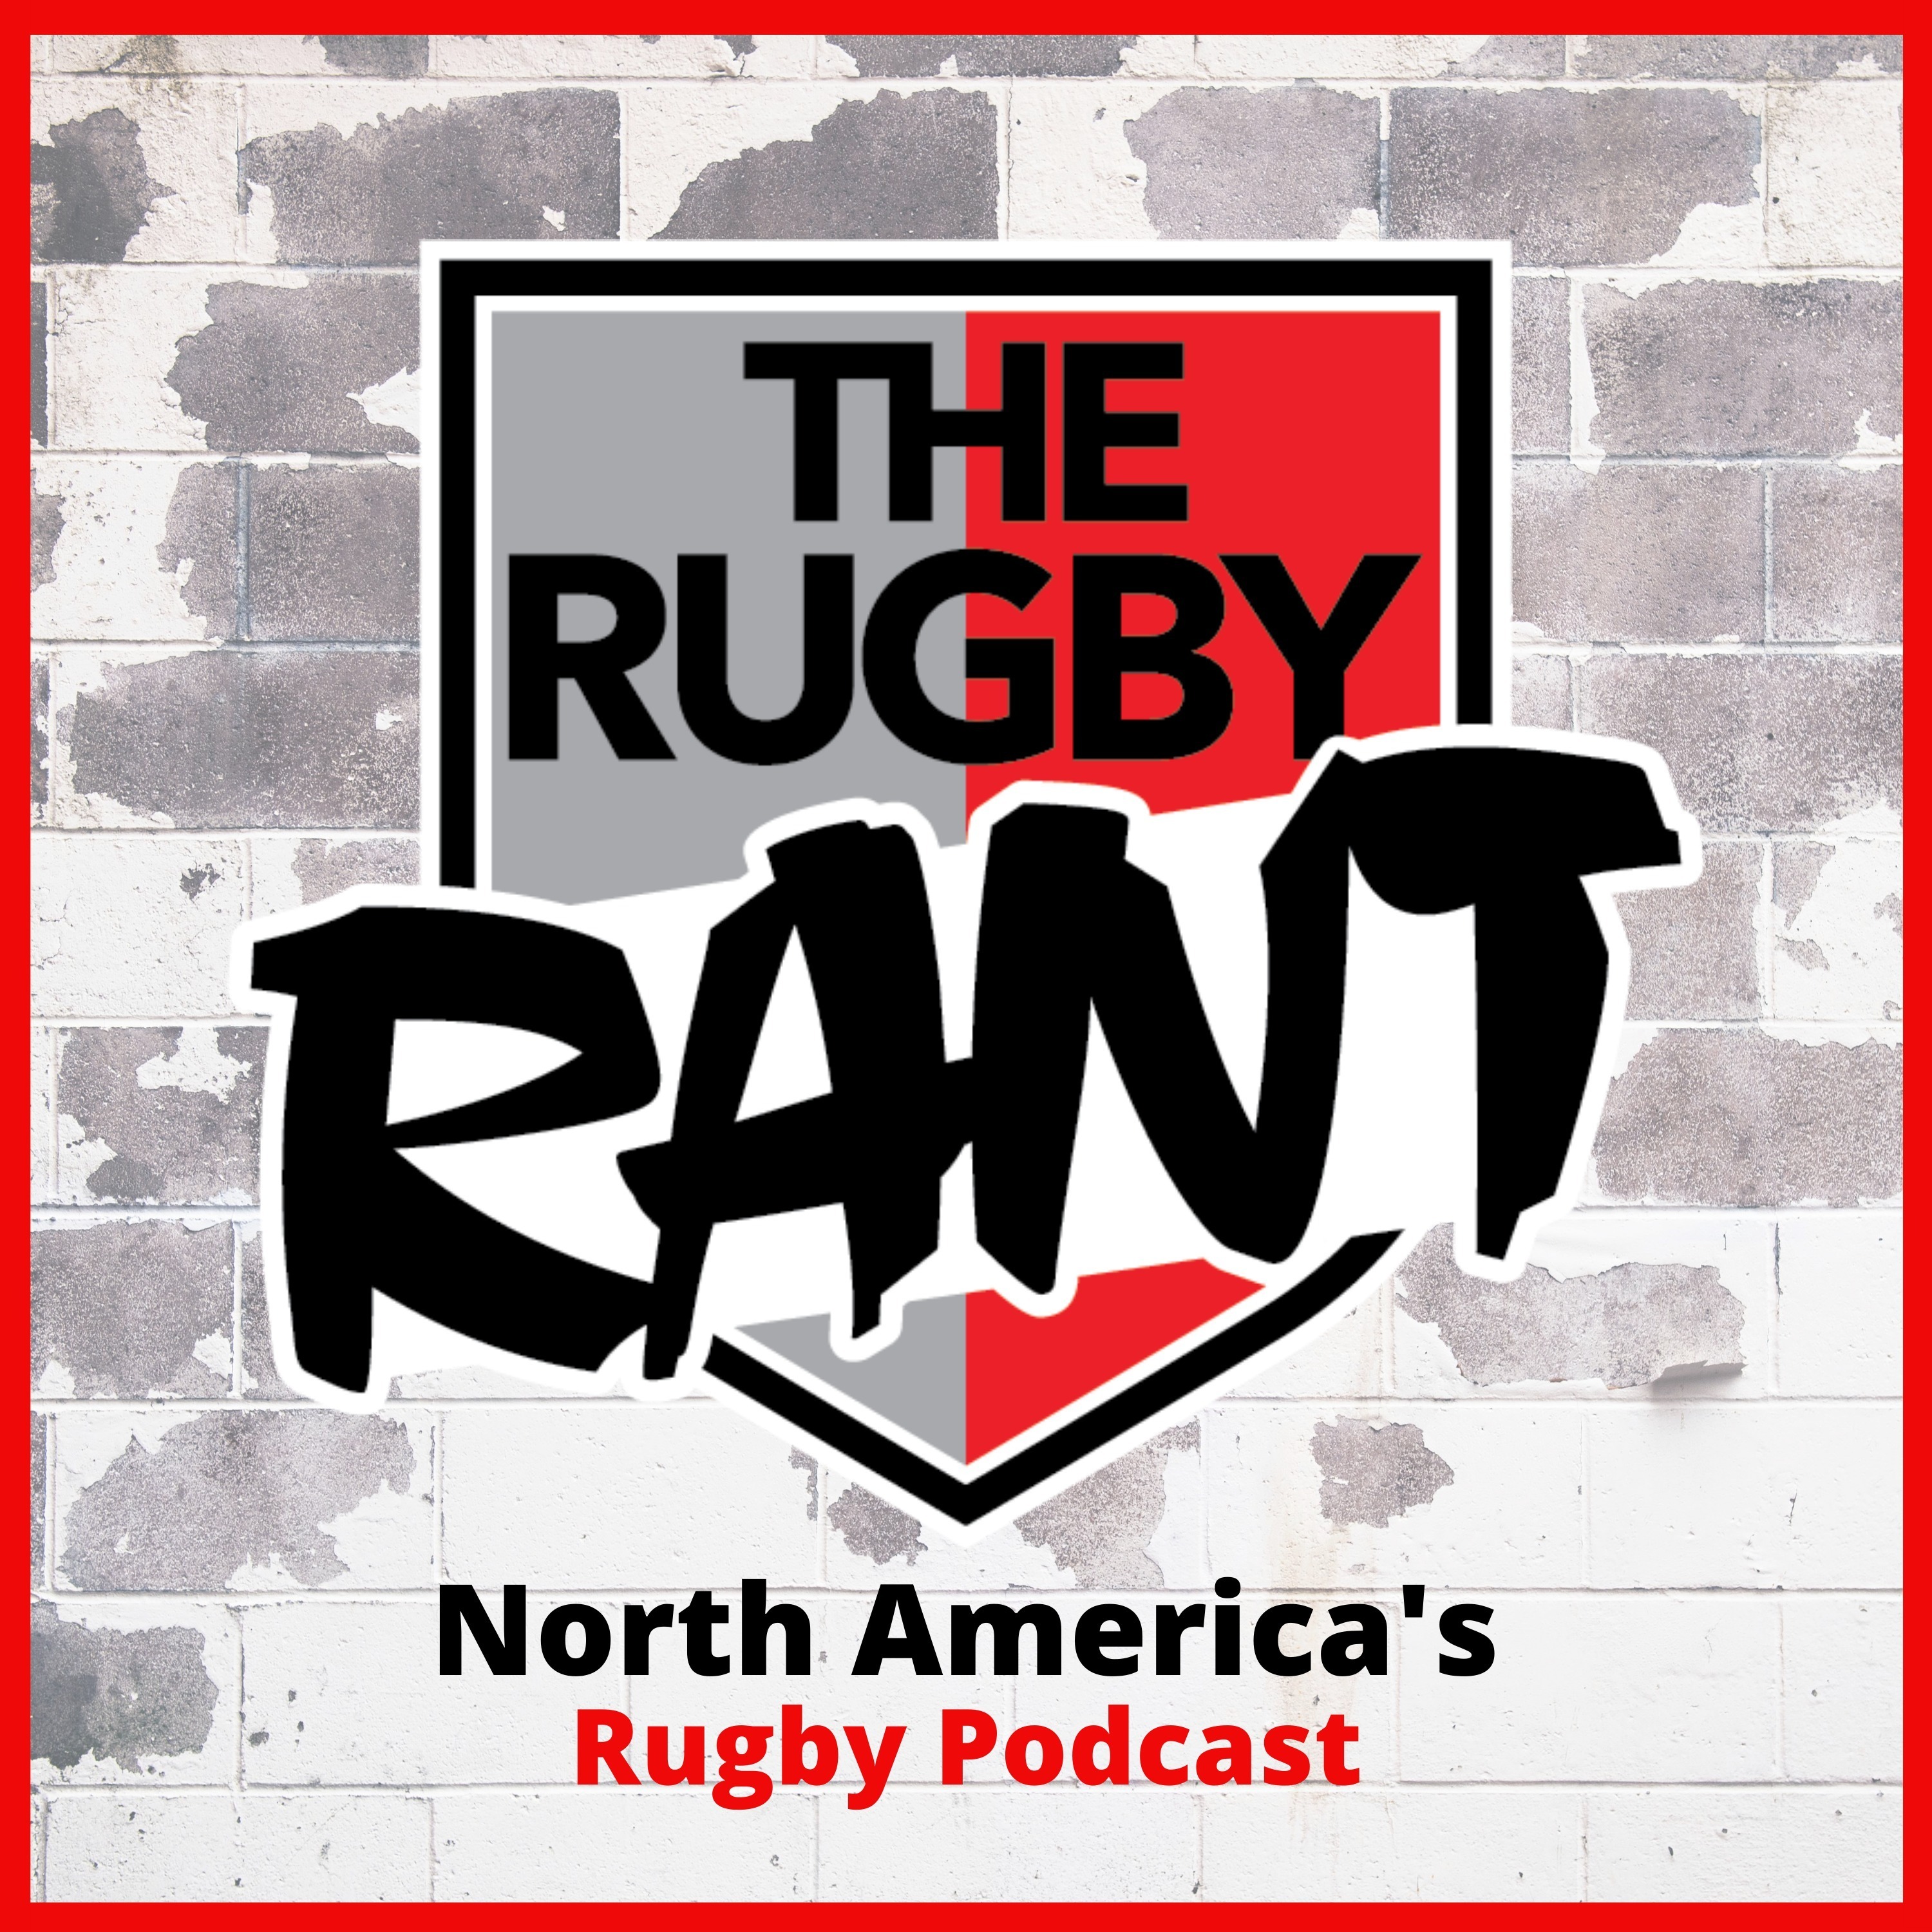 The Rugby Rant - Episode 35